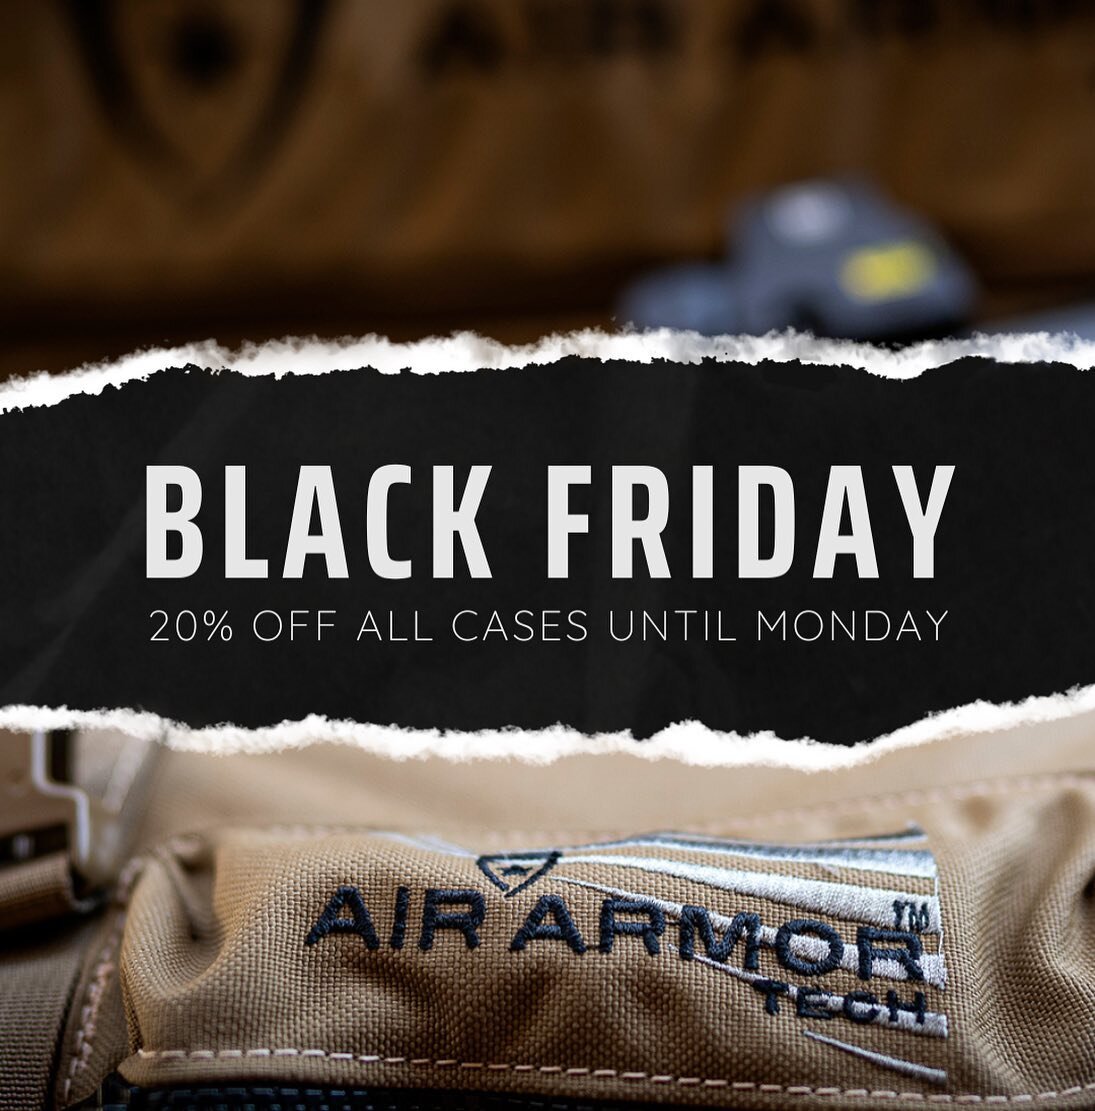 HERE WE GO! Black Friday pricing on NOW! PLUS free t-shirt with every order! Price automatically updates in cart. We never drop prices this low, get yours while supplies last. www.airarmortech.com